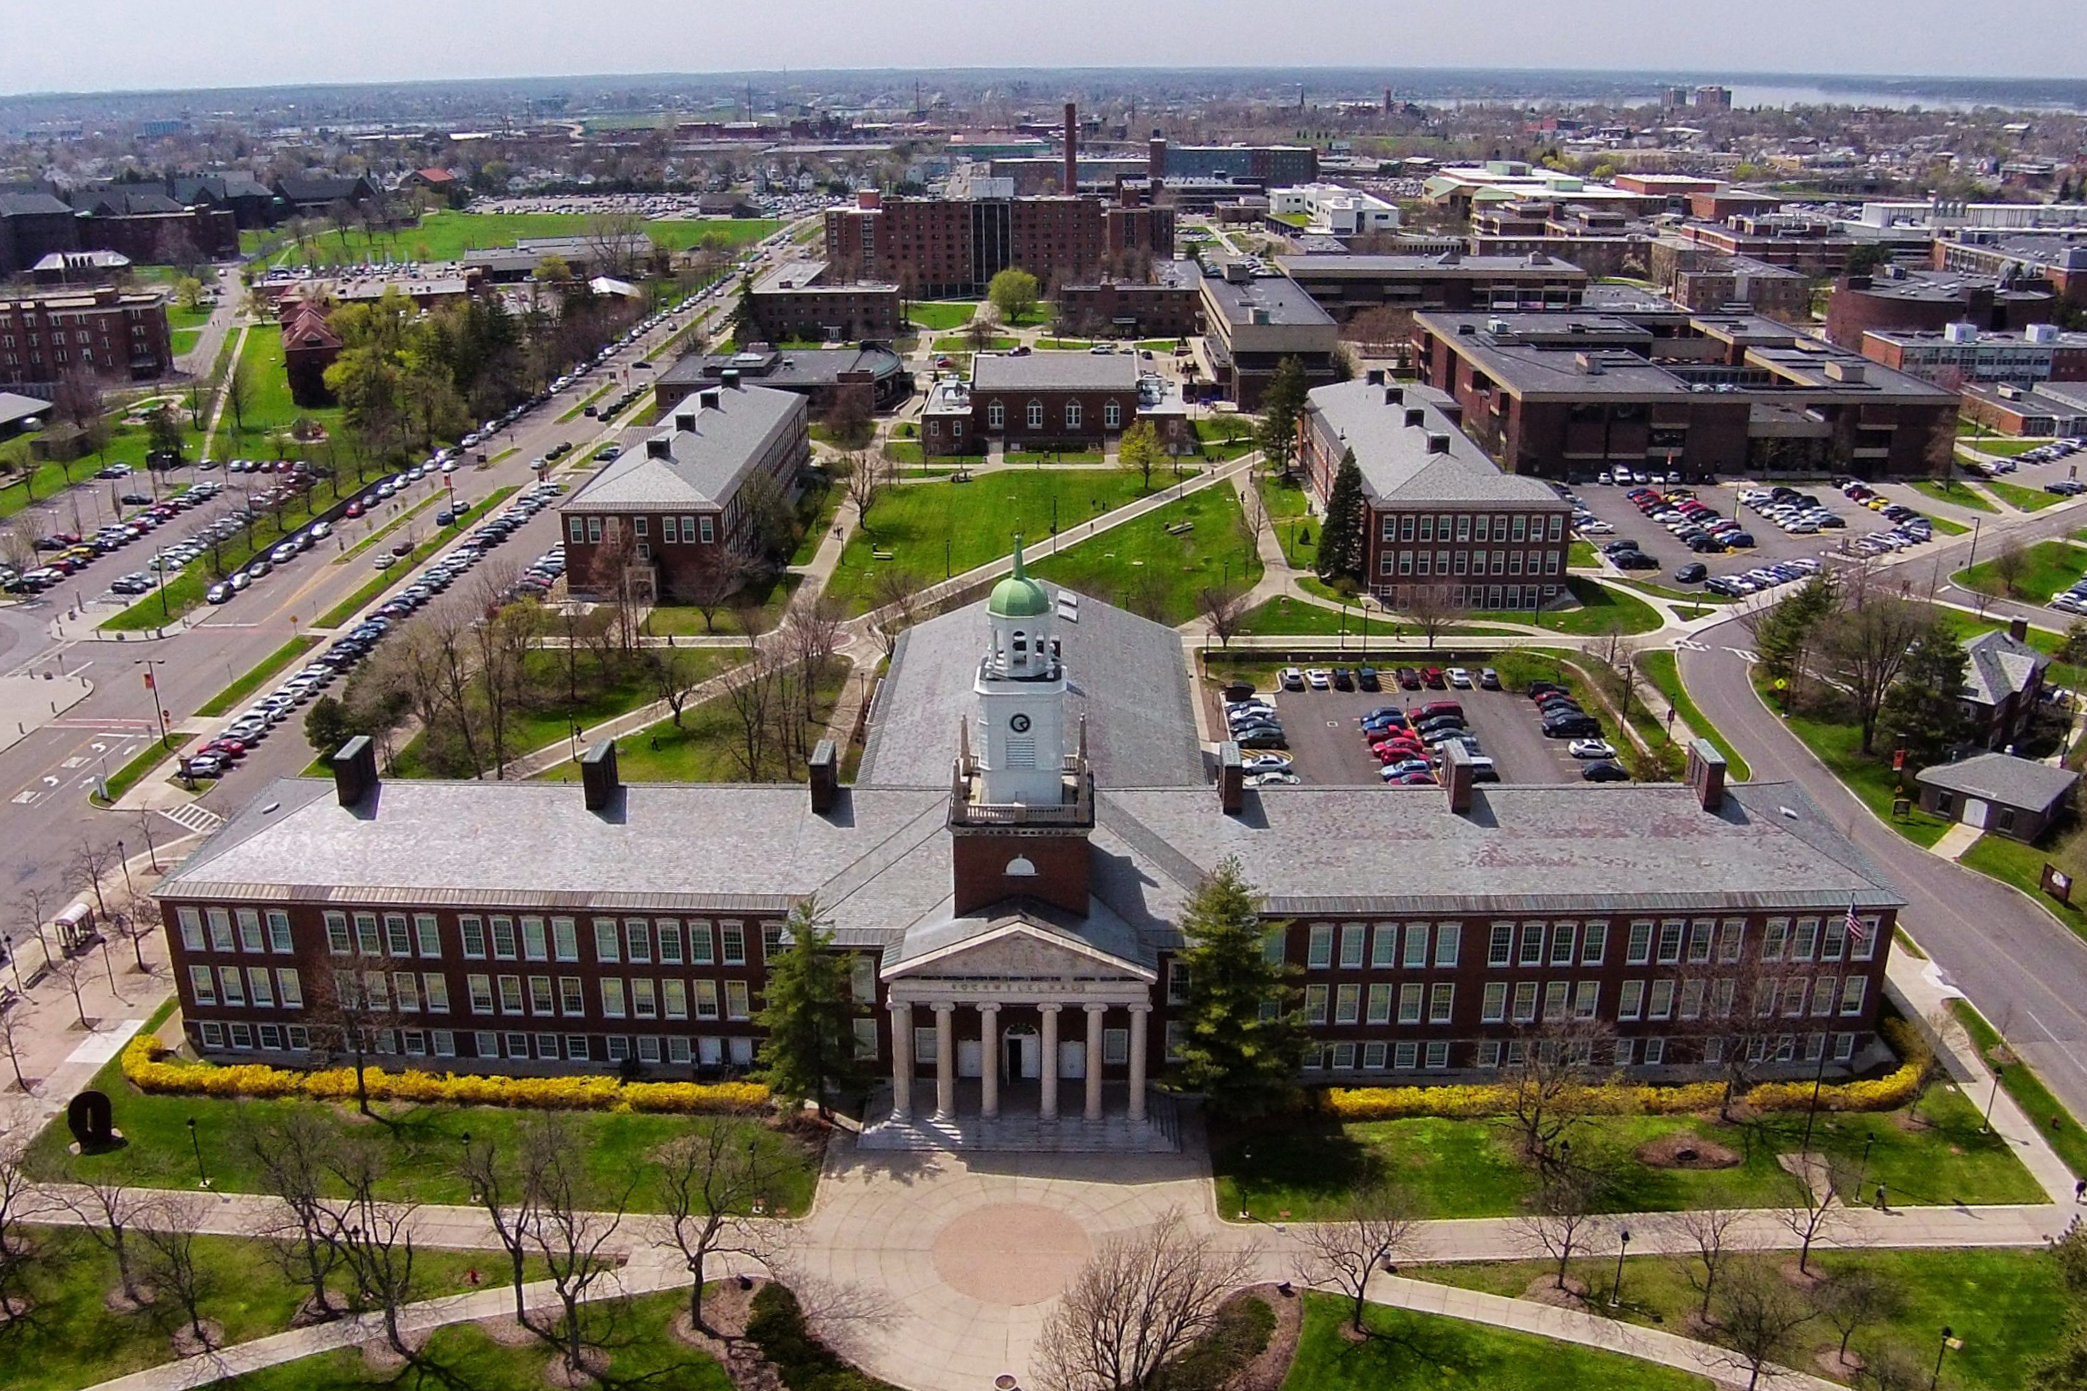 The State University of New York College at Buffalo was founded in 1871 as the Buffalo Normal School to train teachers and currently enrolls approximately 10,000 students.